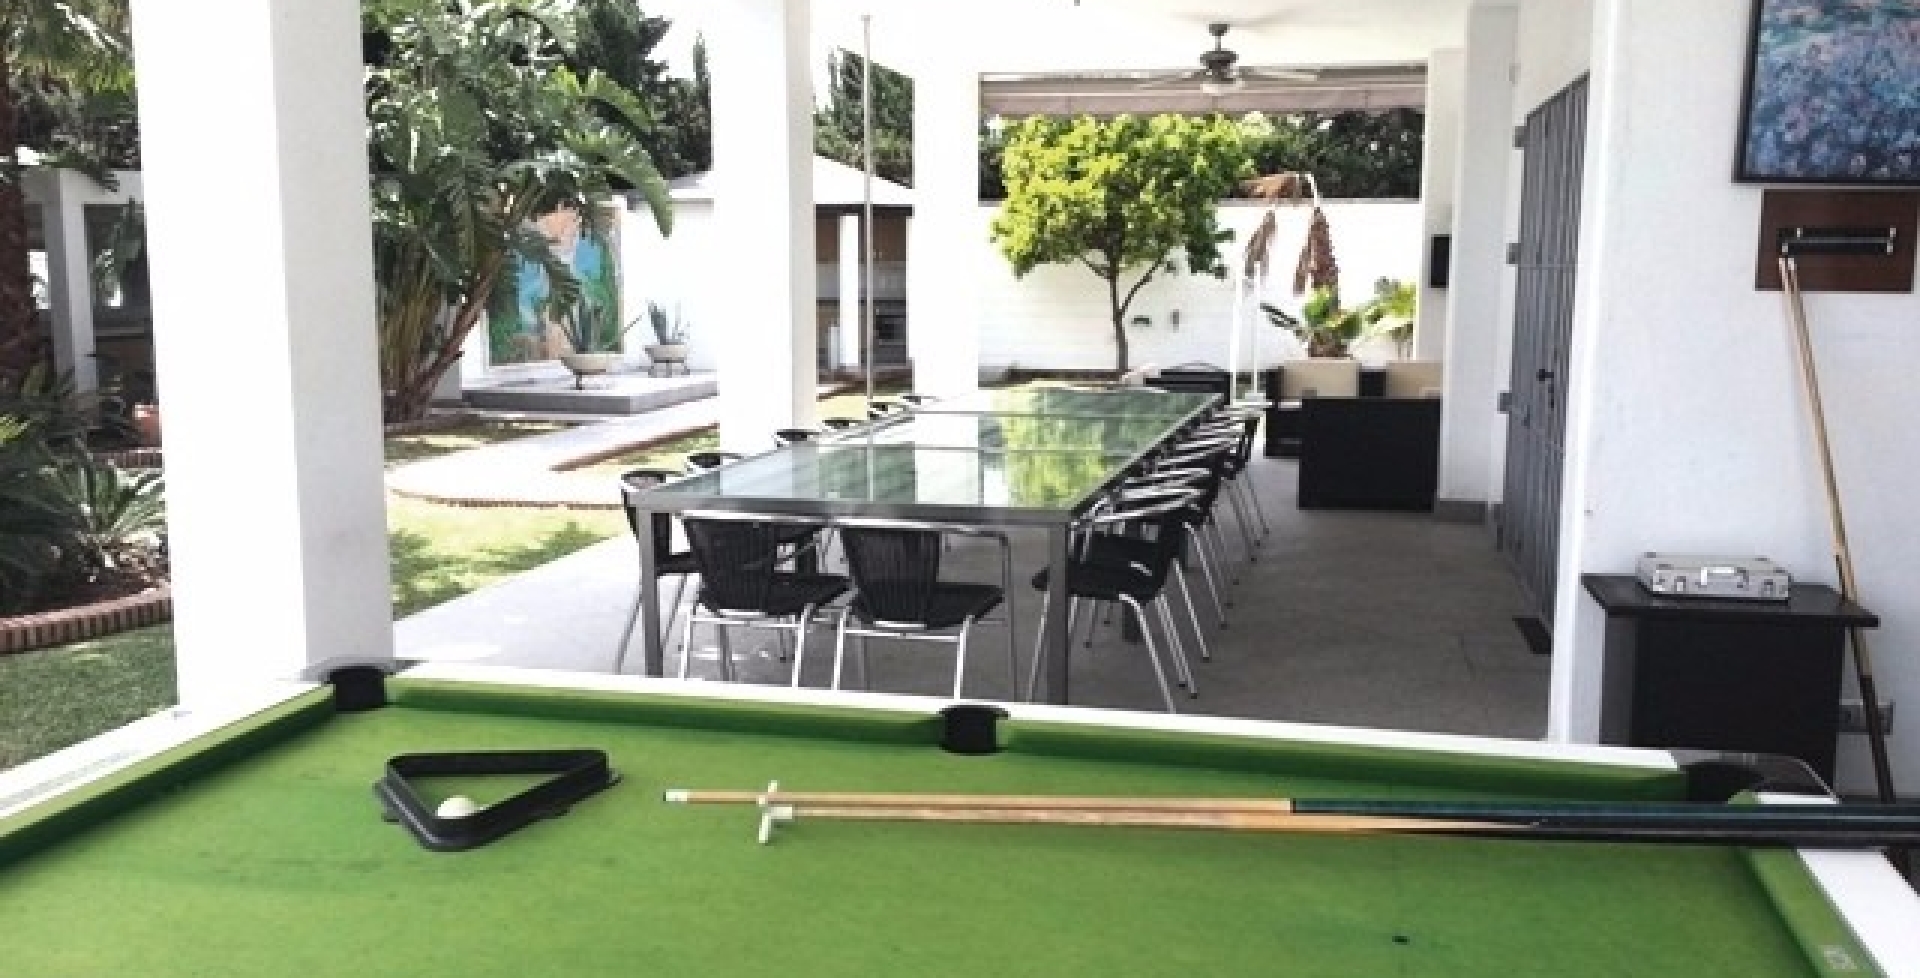 Pool table and exterior dining